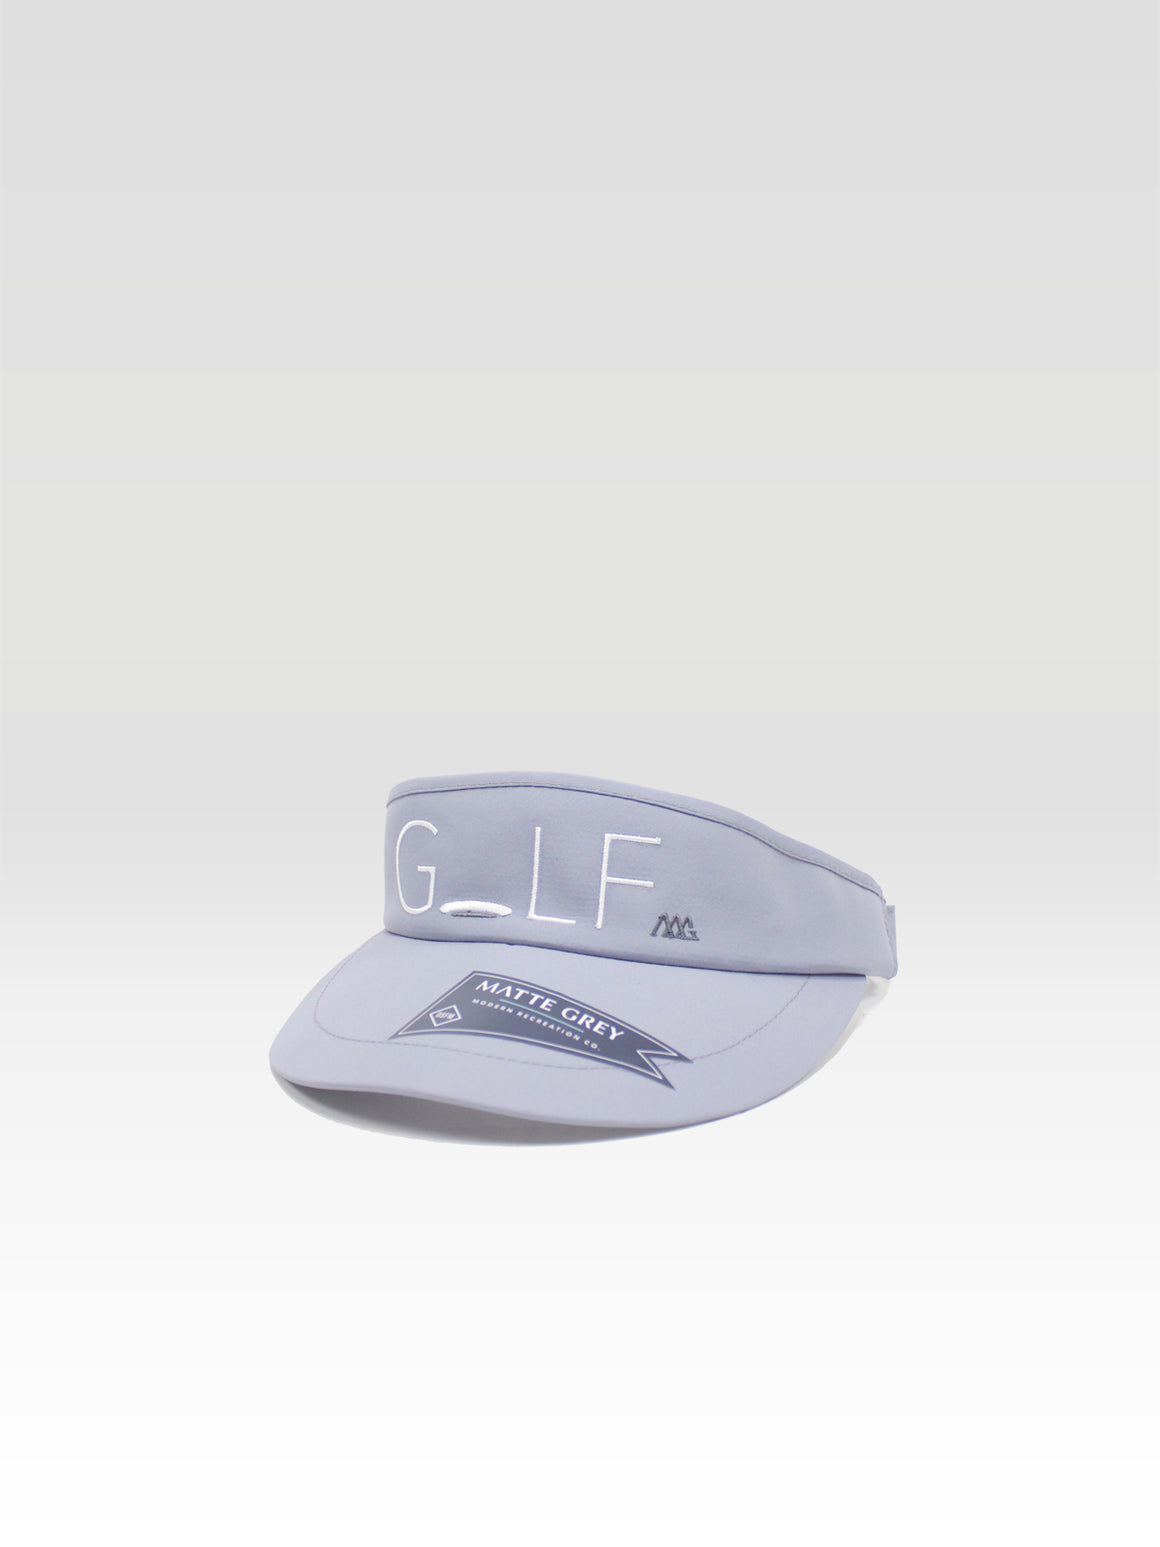 Hole-In-One Visor - Frost Grey (White)